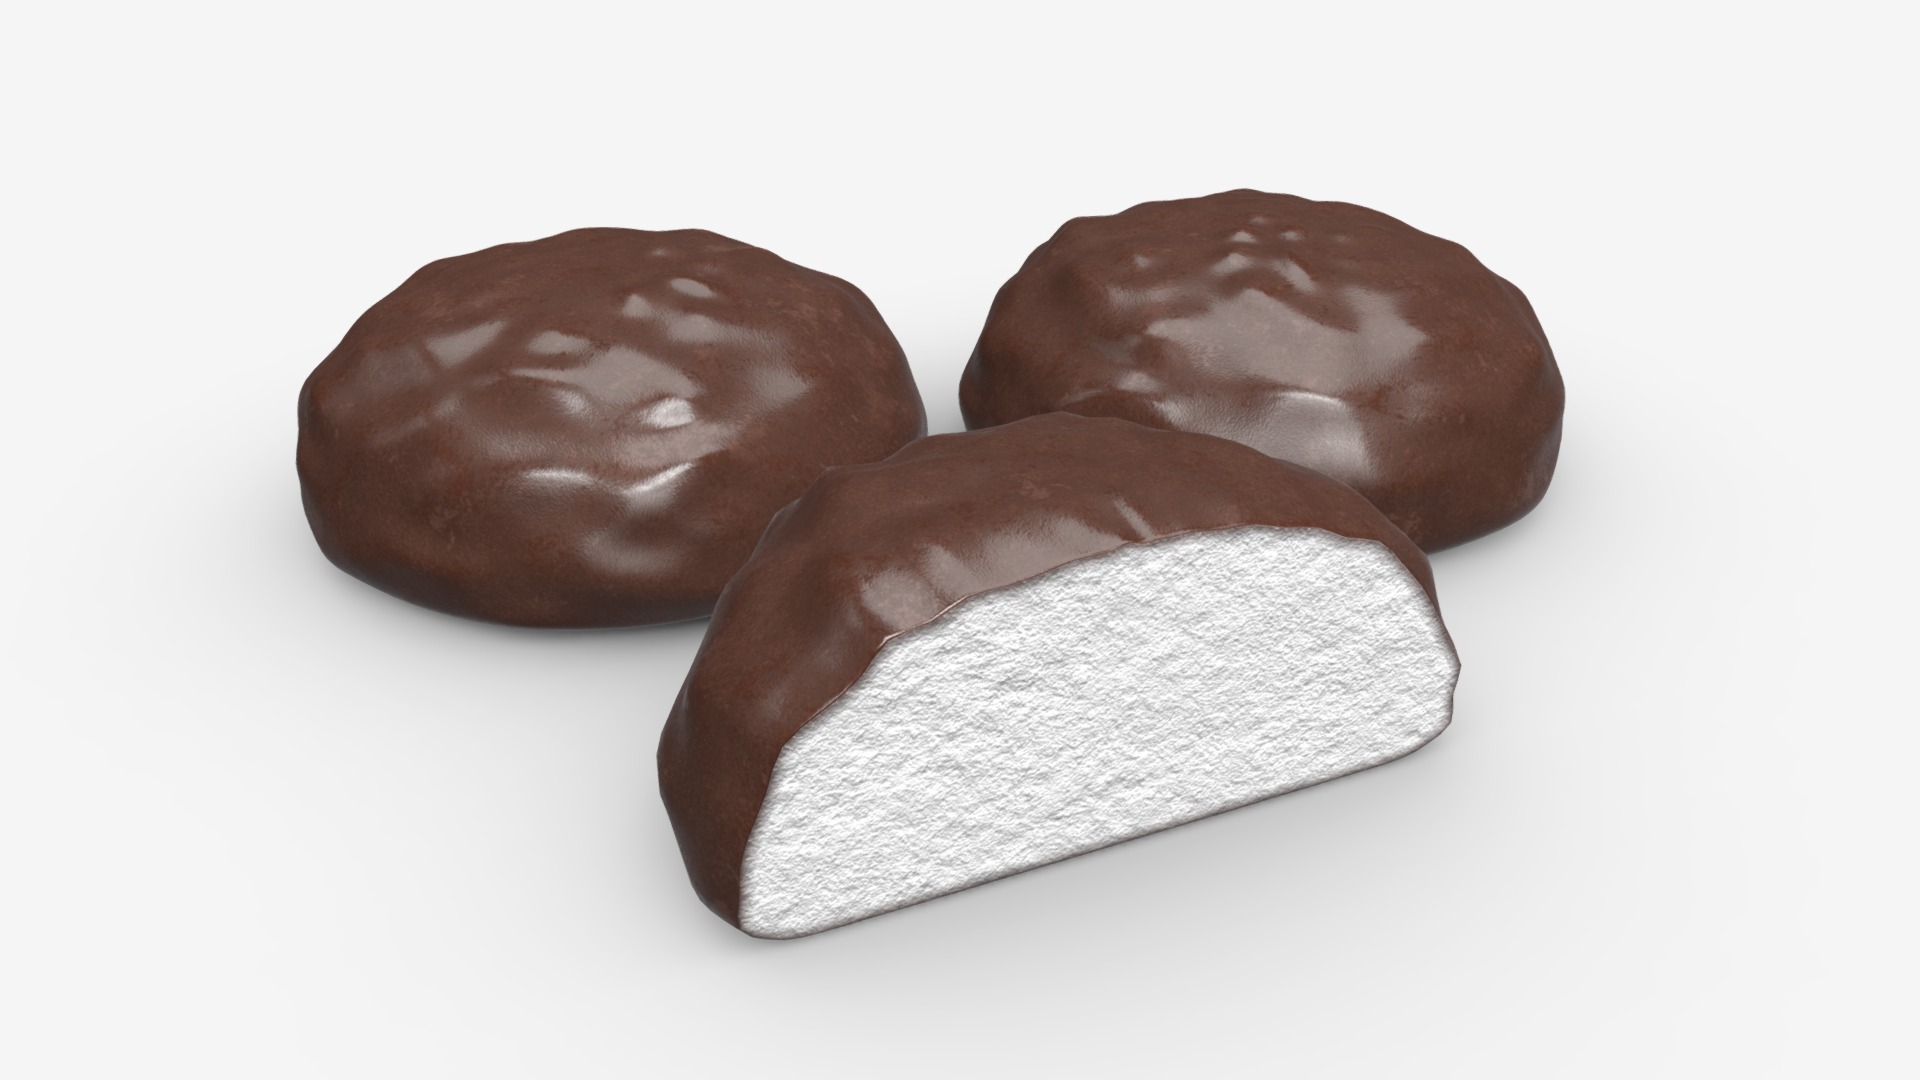 3D model Marshmallows covered with chocolate - This is a 3D model of the Marshmallows covered with chocolate. The 3D model is about a couple of chocolate candies.